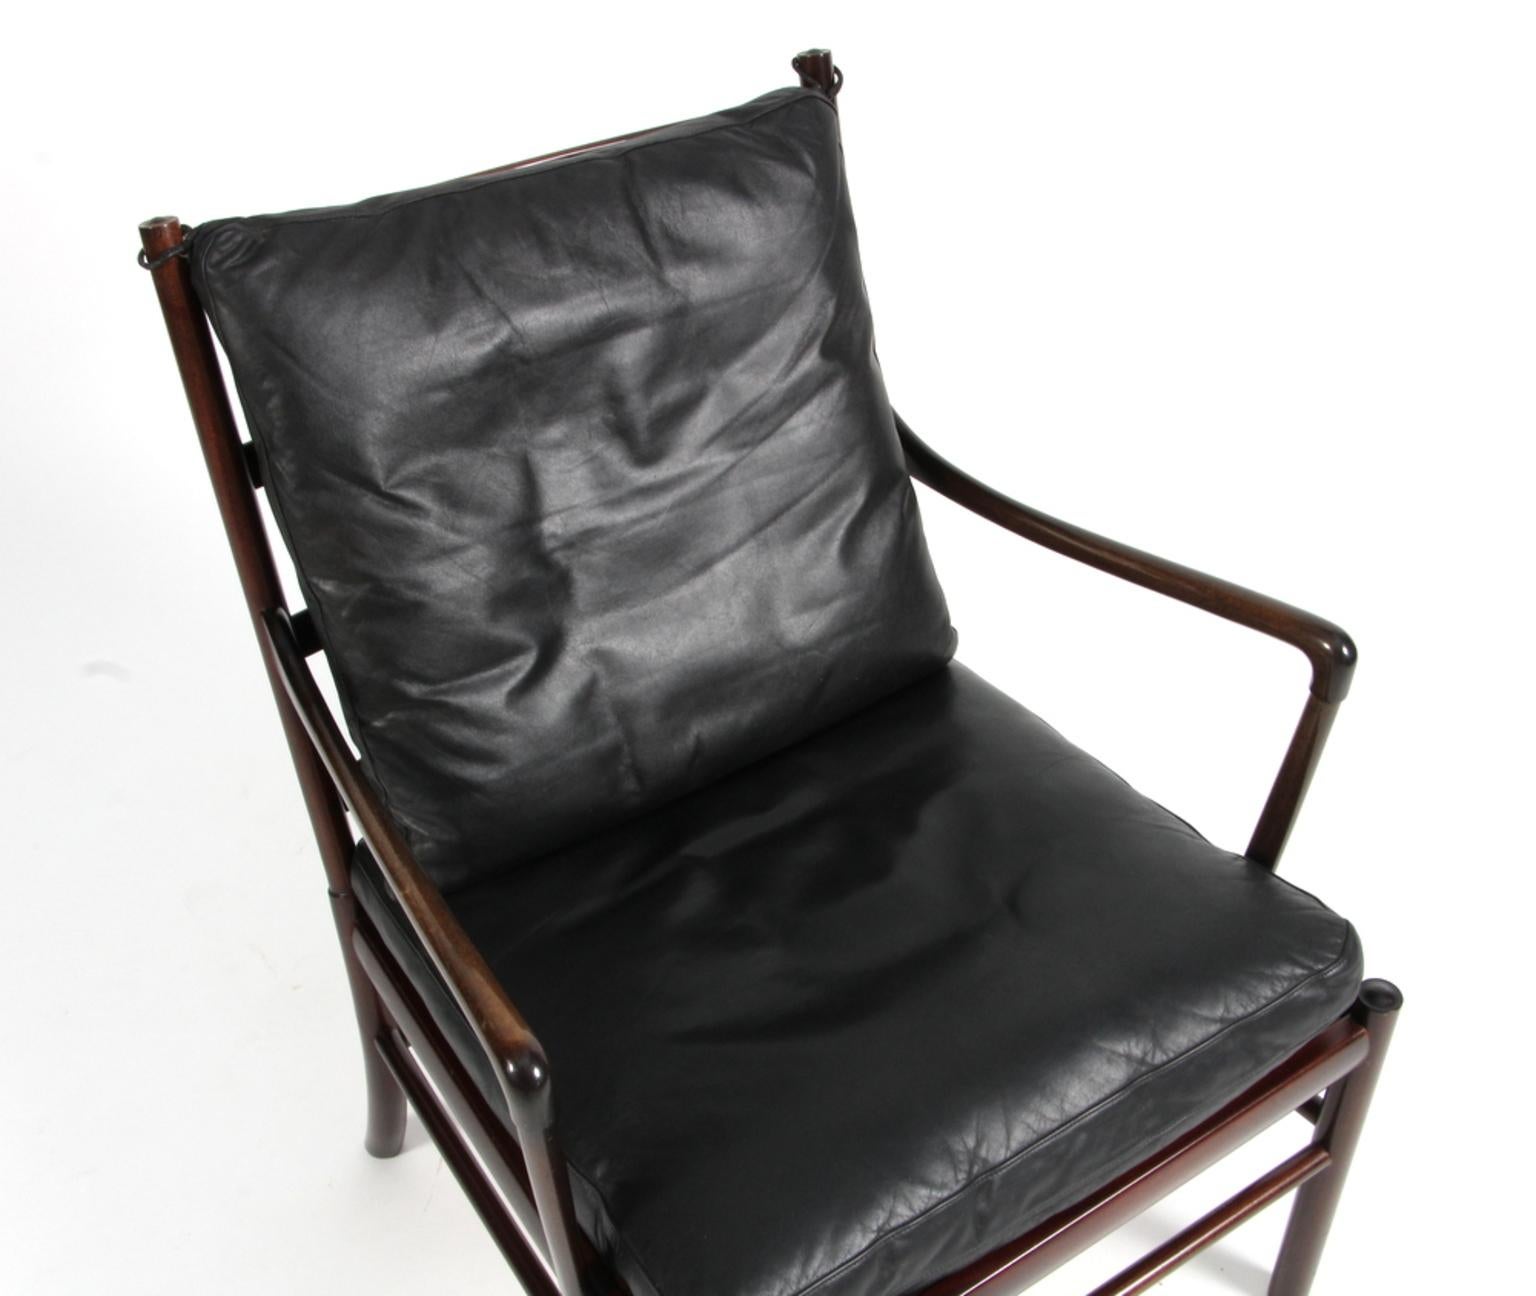 Ole Wanscher lounge chair original upholstered with black leather.

Made in mahogany. 

Model PJ 149 colonial chair, made by Poul Jeppesen.